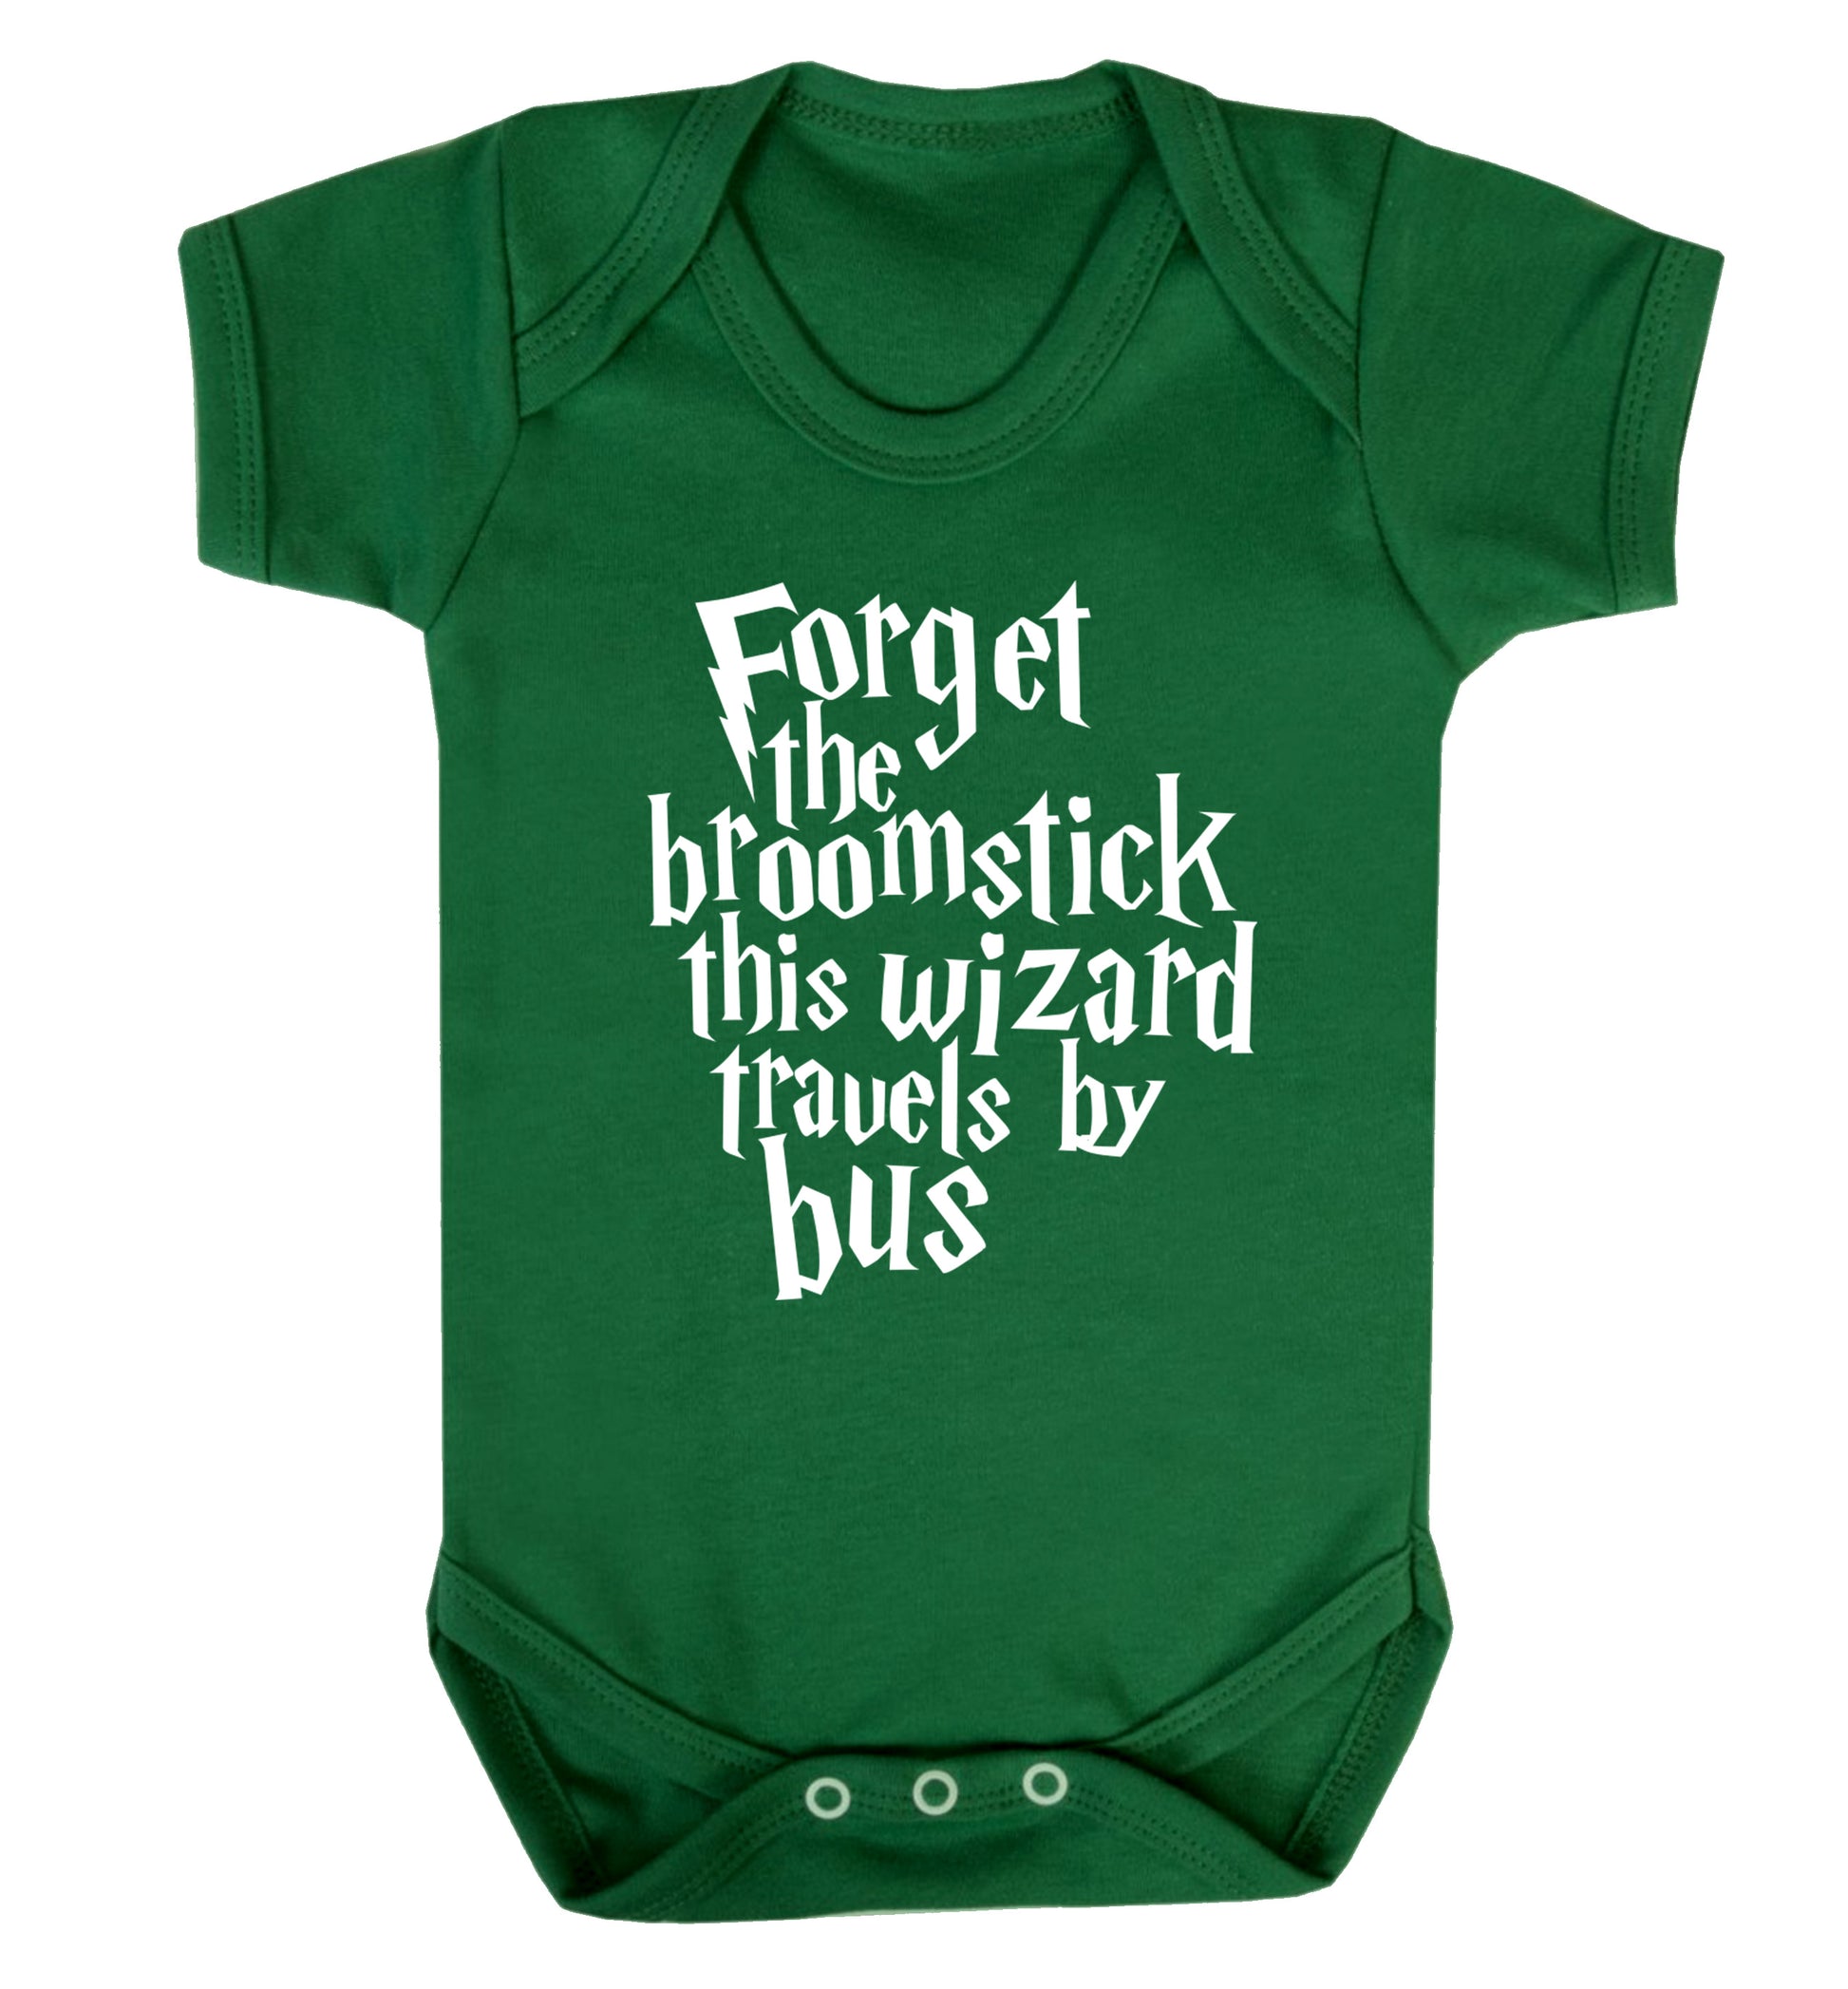 Forget the broomstick this wizard travels by bus Baby Vest green 18-24 months